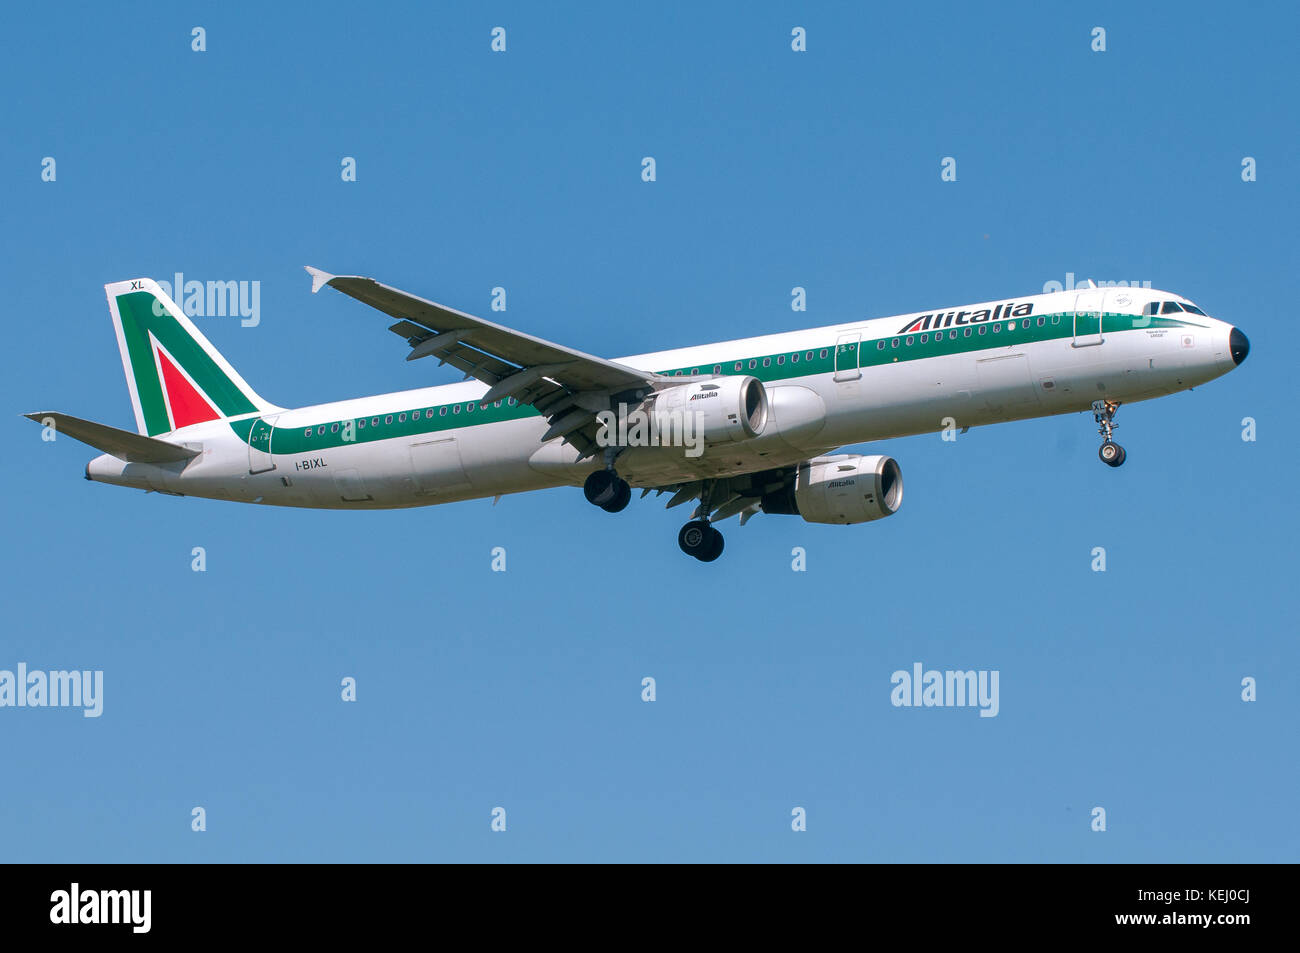 London, UK, April 9 2011: 2-engines Airbus A321 of Alitalia italian national carrier landing at Heathrow airport. Stock Photo